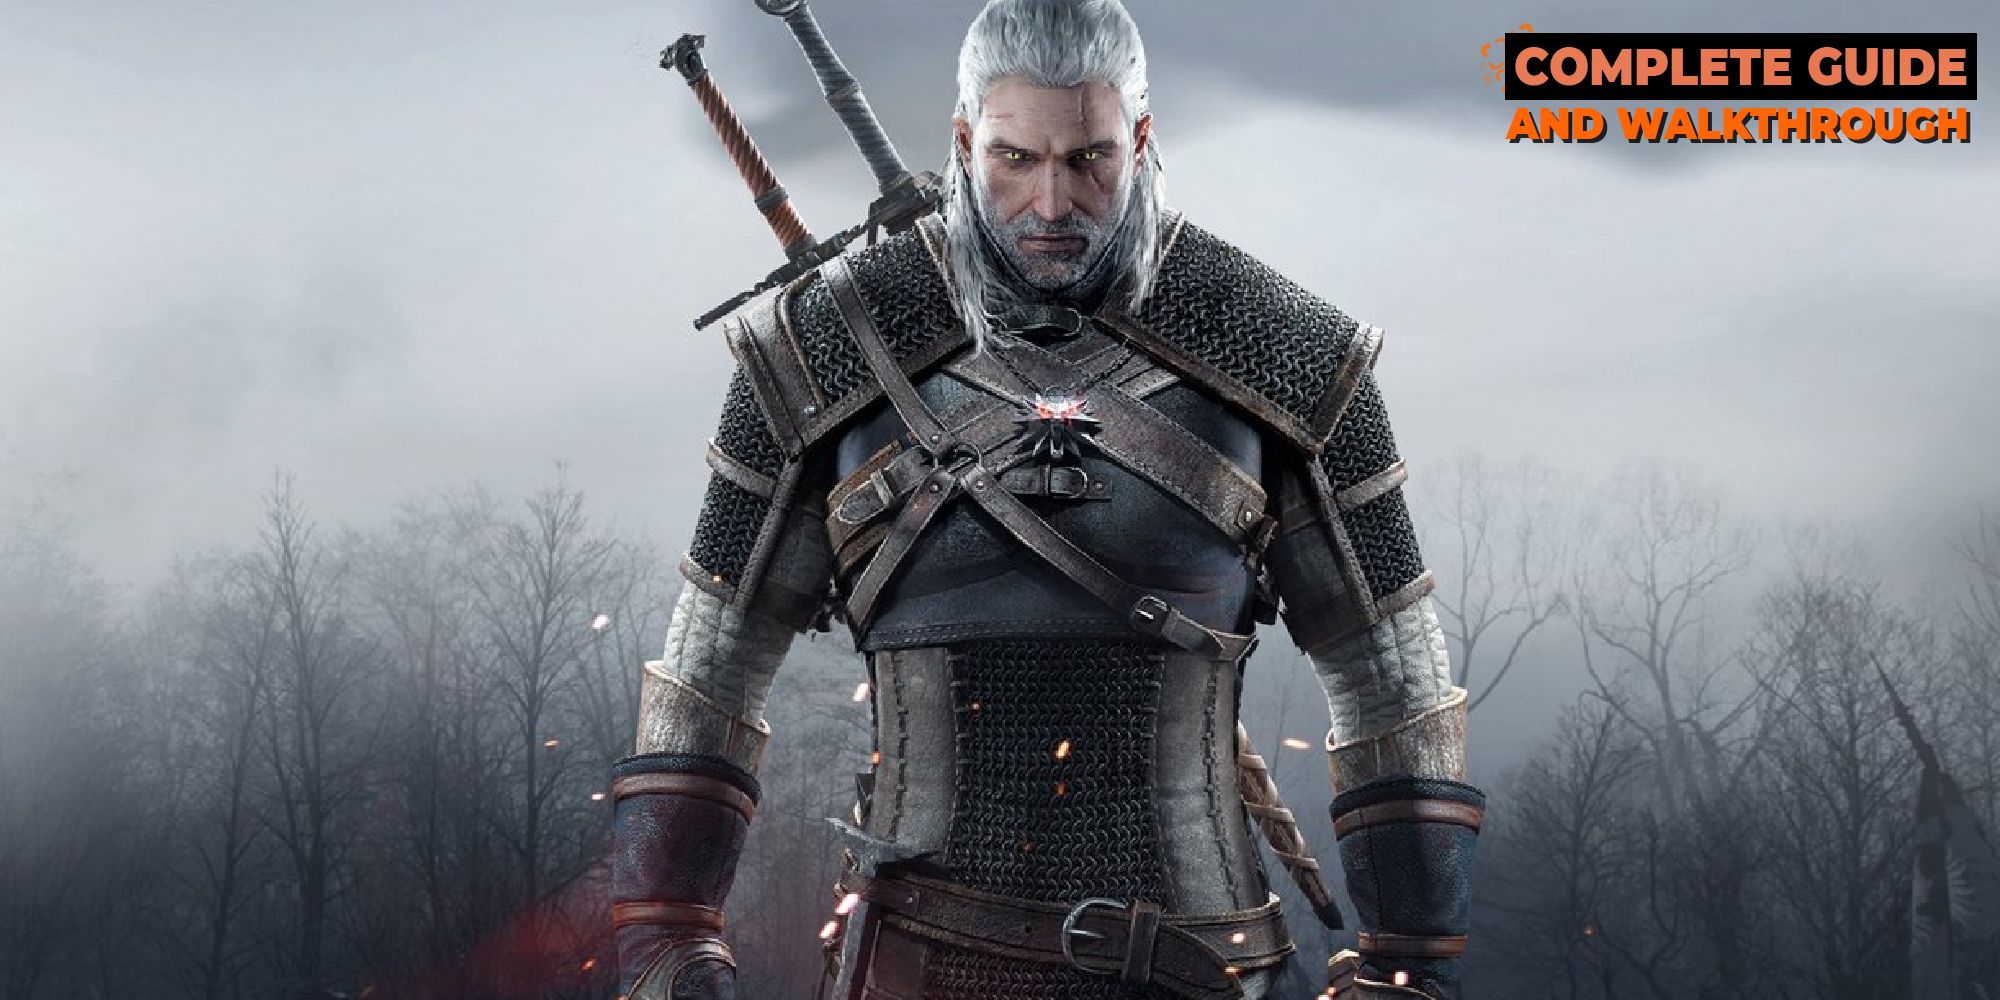 The Witcher 3: Wild Hunt – A Complete Guide